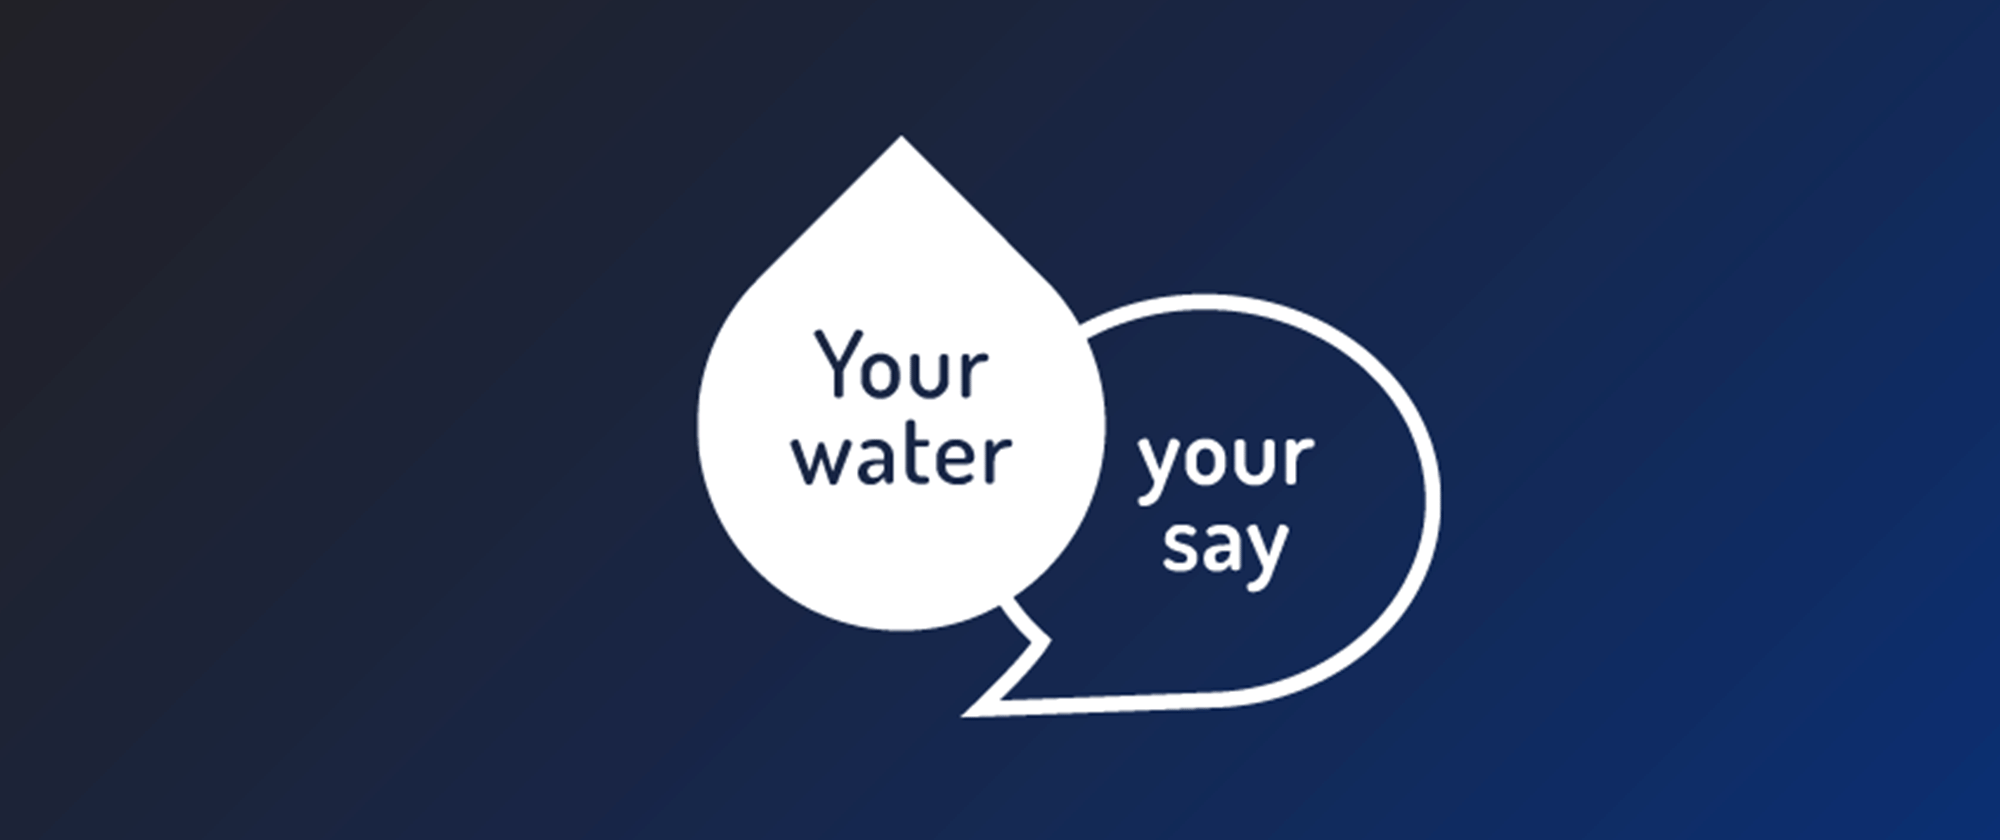 Your Water, your Say image